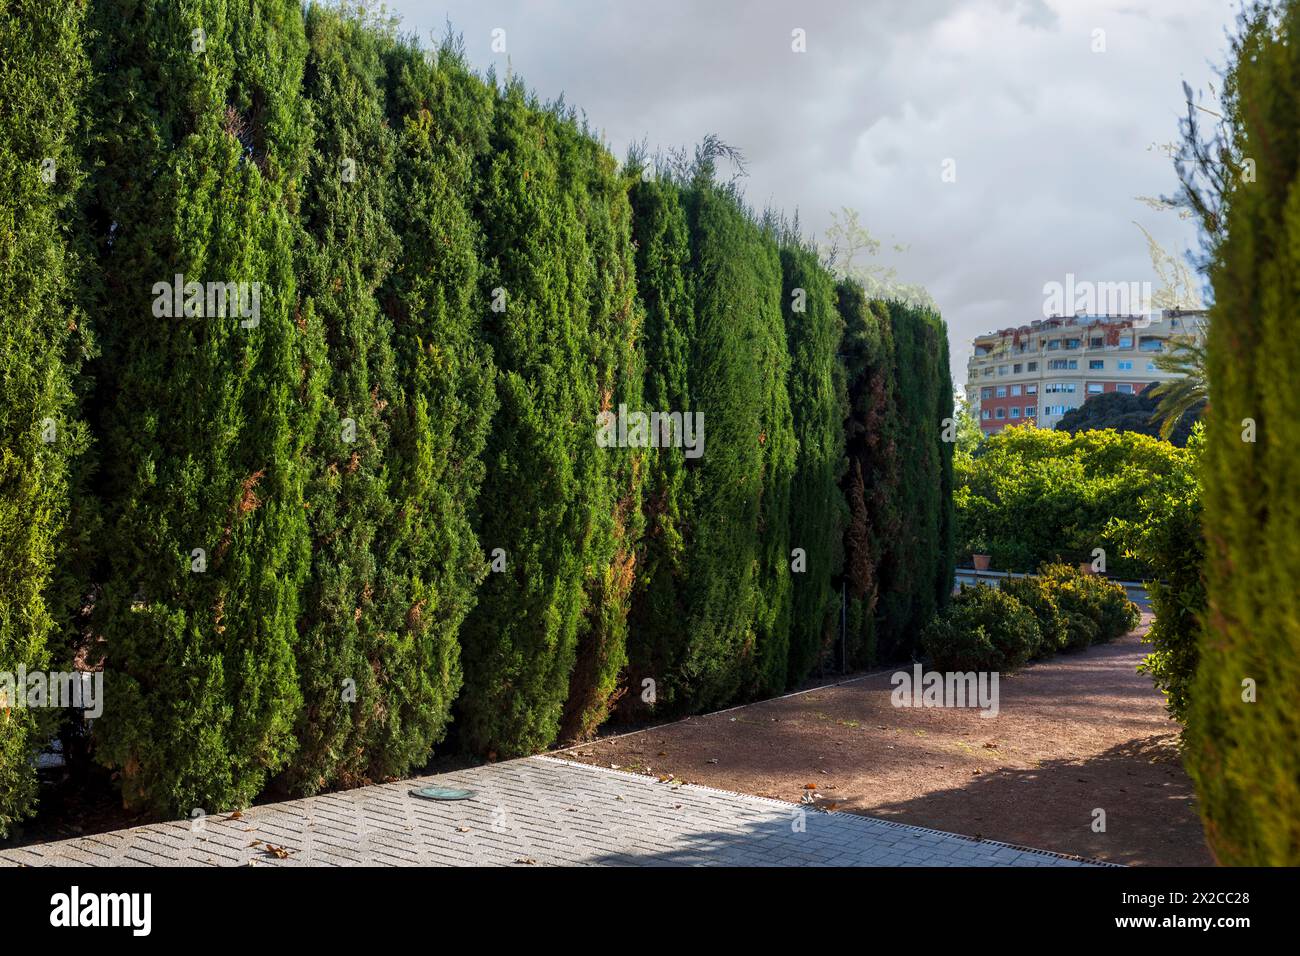 A small Landscape park in the city center, with neatly trimmed trees and gravel paths. Stock Photo